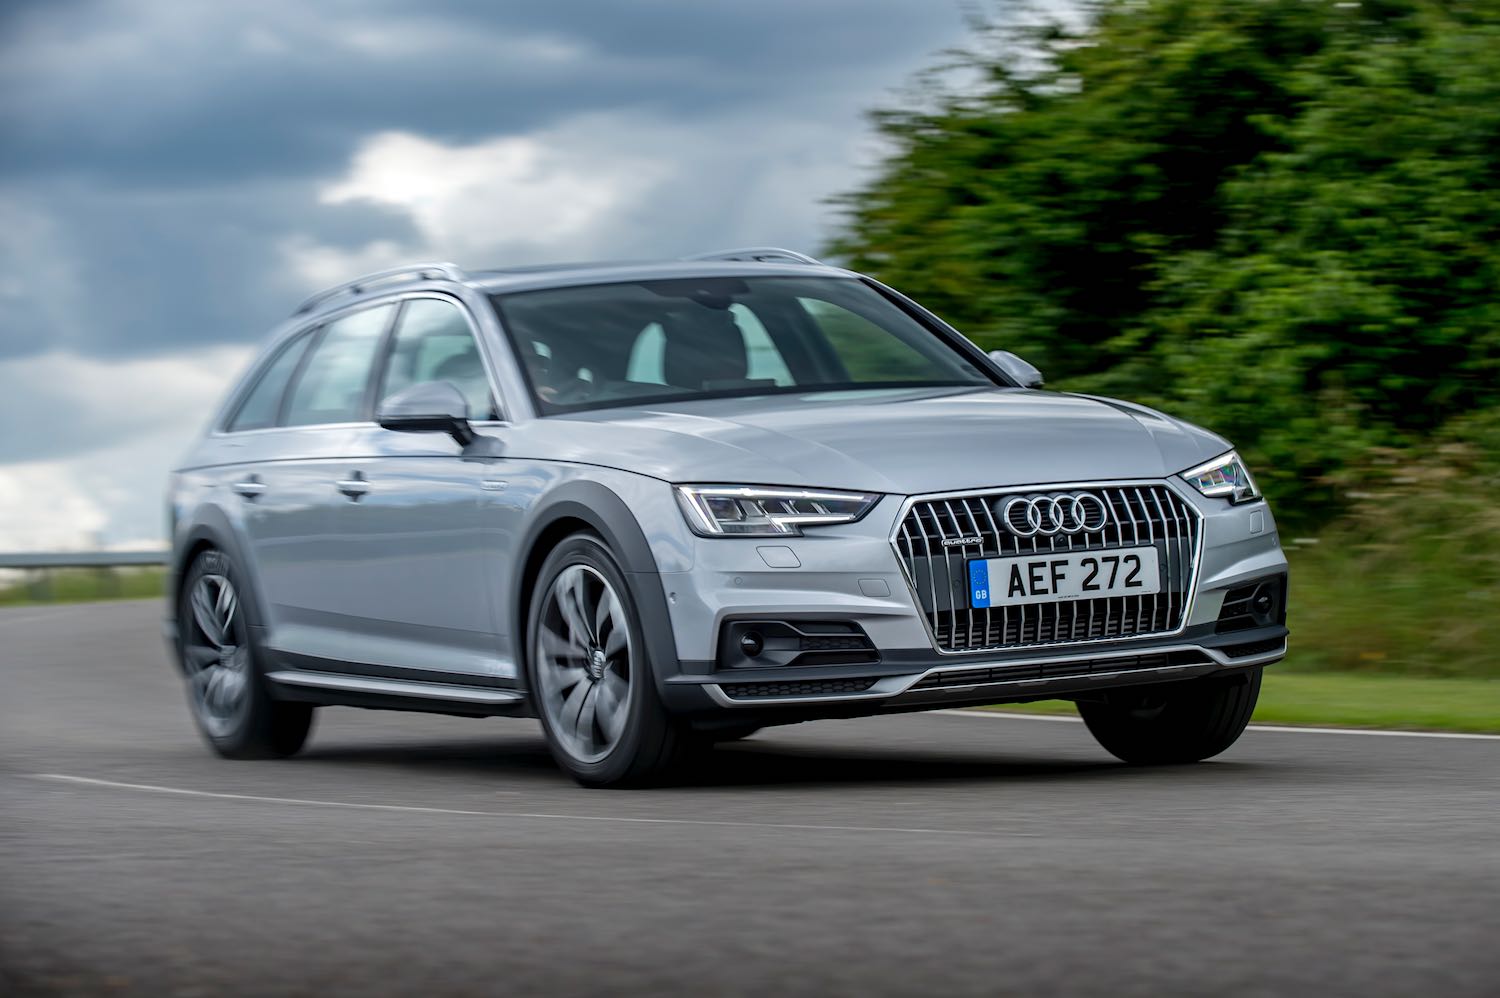 Neil Lyndon reviews the Audi Allroad for drive-3